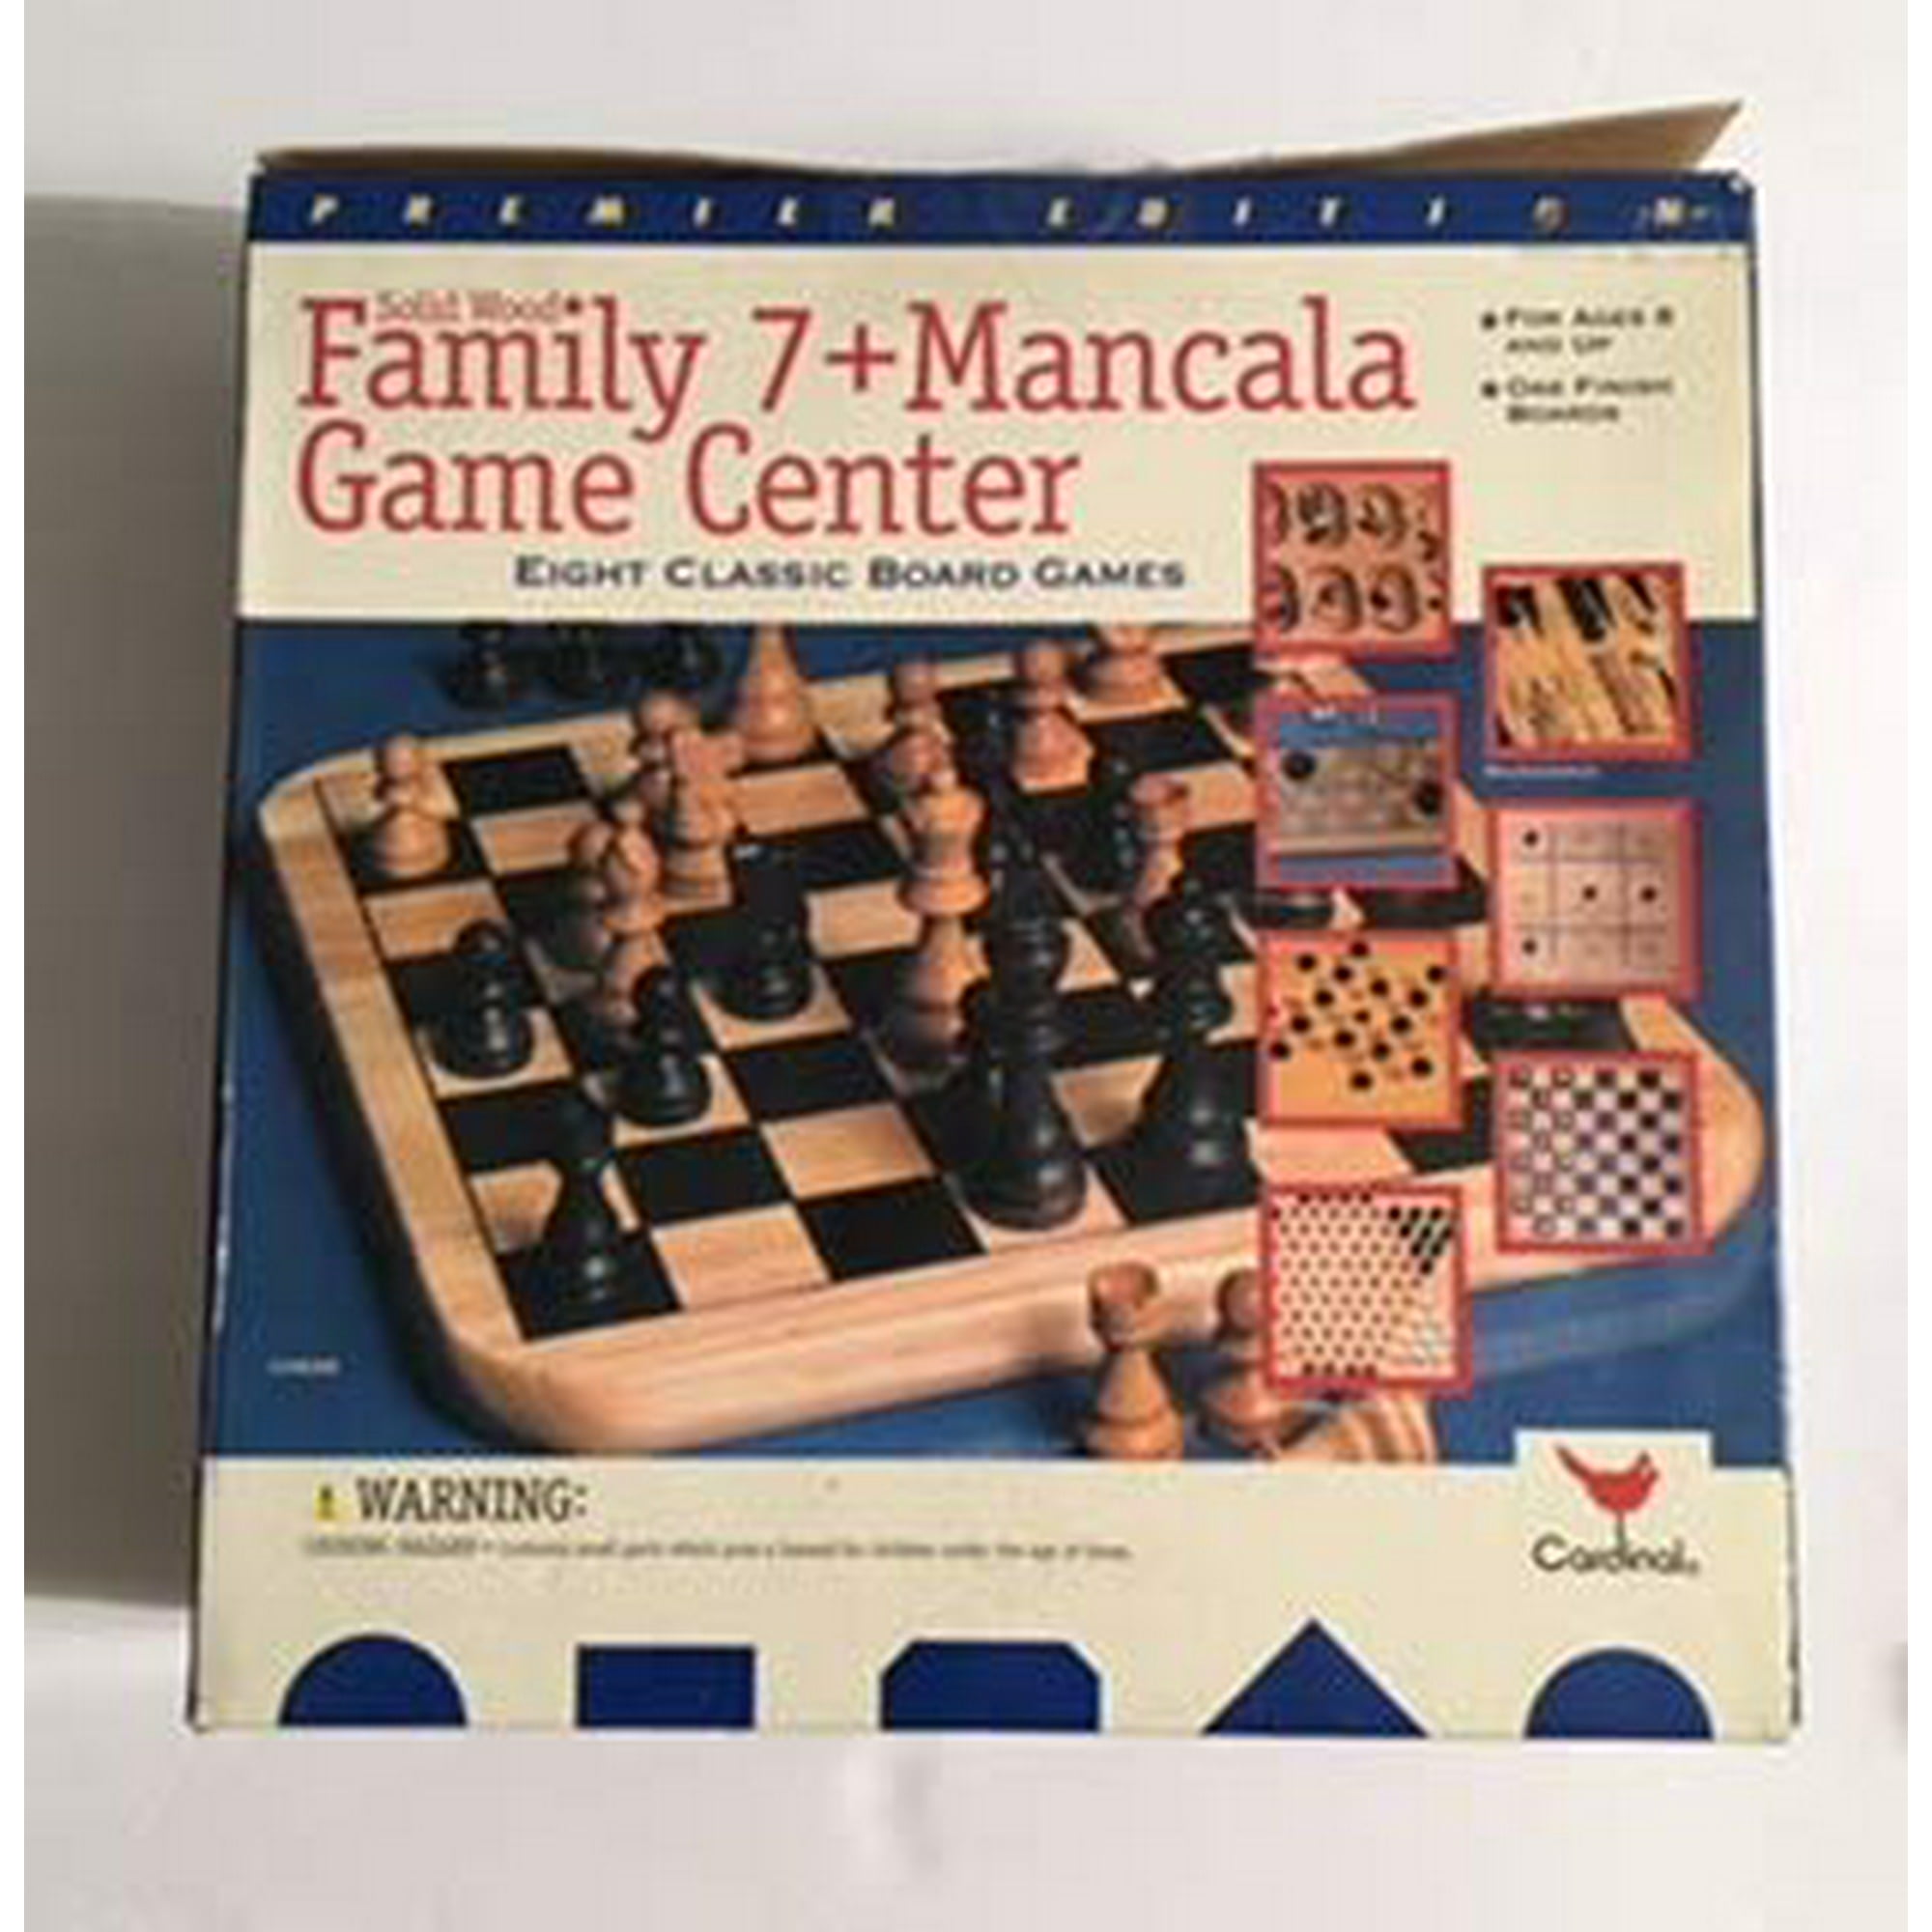 Mancala 7 Game Center By Cardinal Solid Wood Boards Eight Classic Board Games Walmart Canada,How To Change A Light Socket